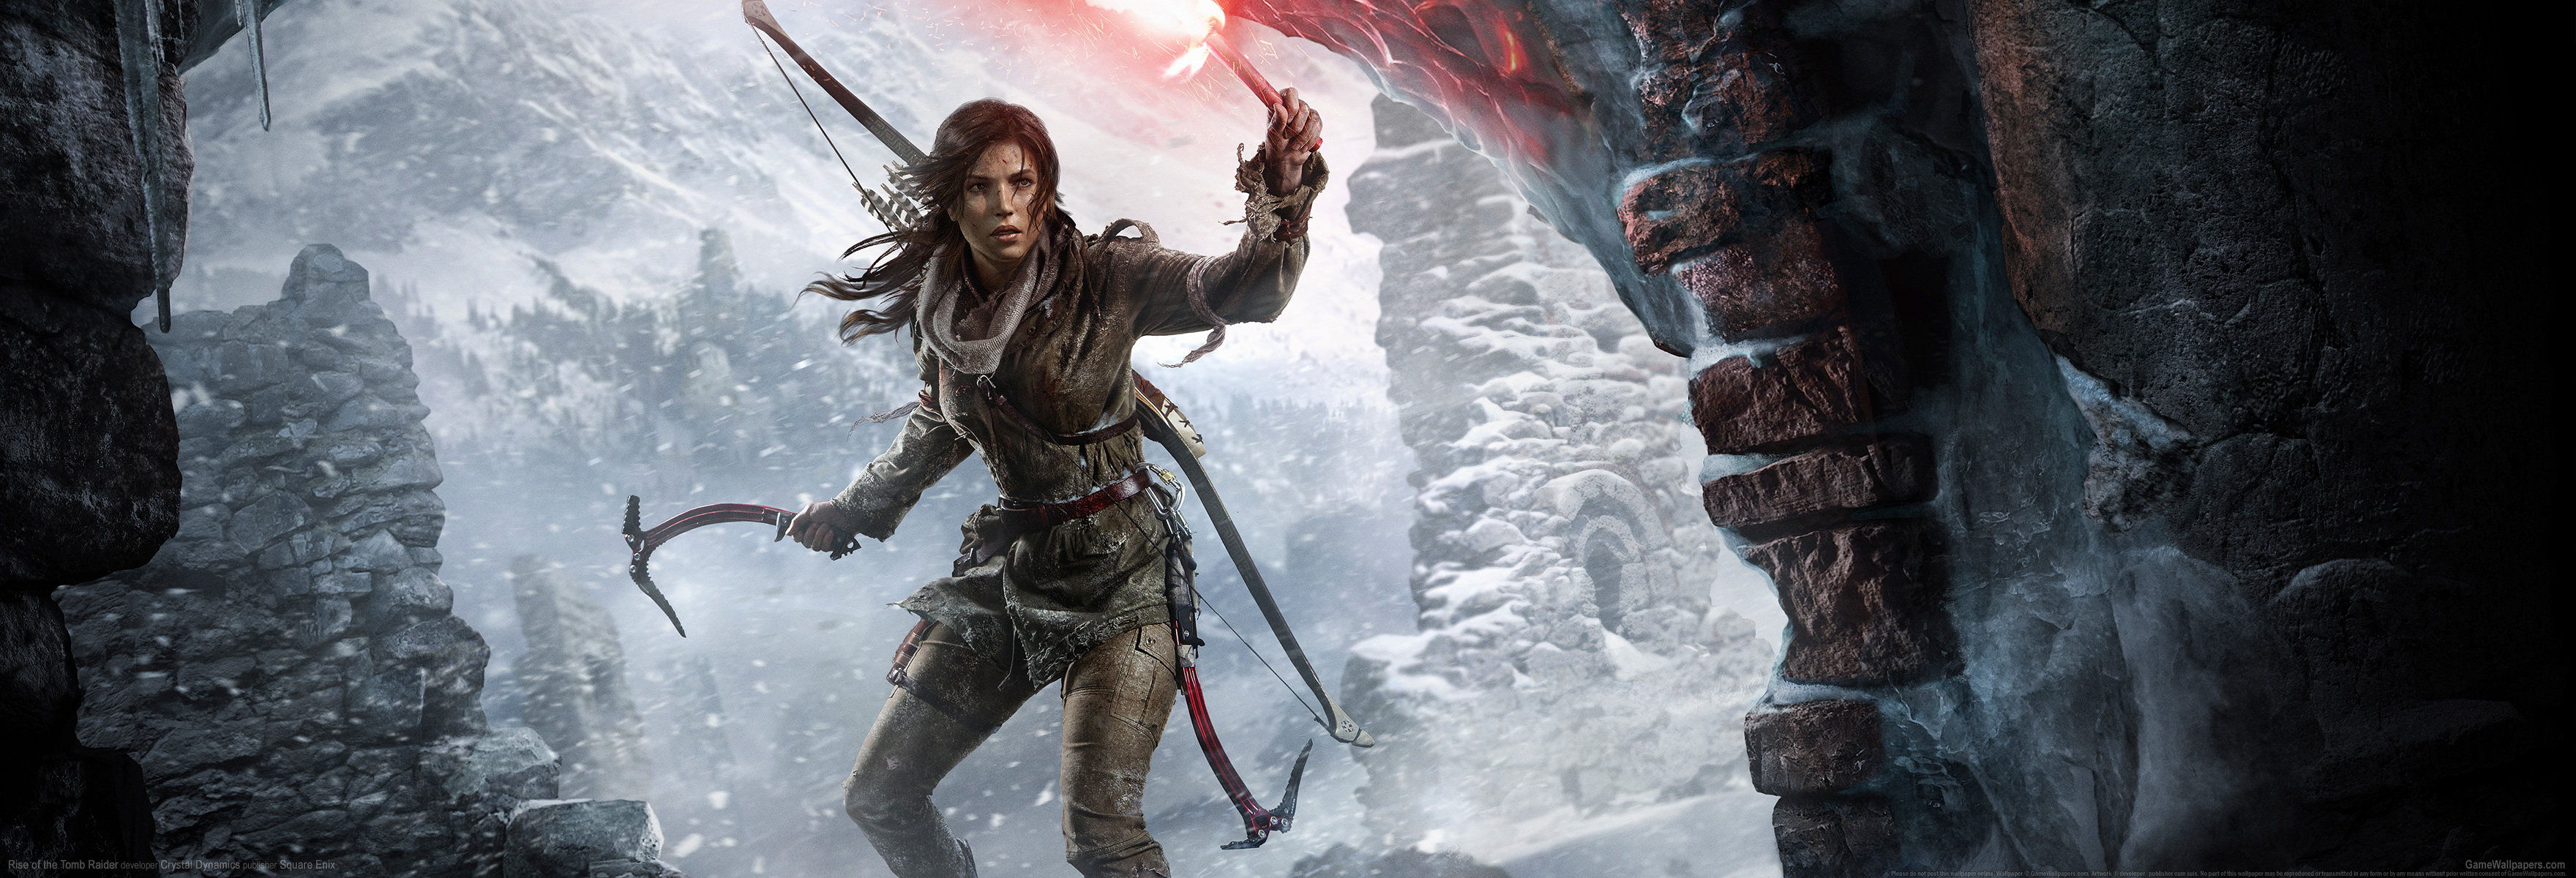 Rise of the Tomb Raider achtergrond 11 3520x1200